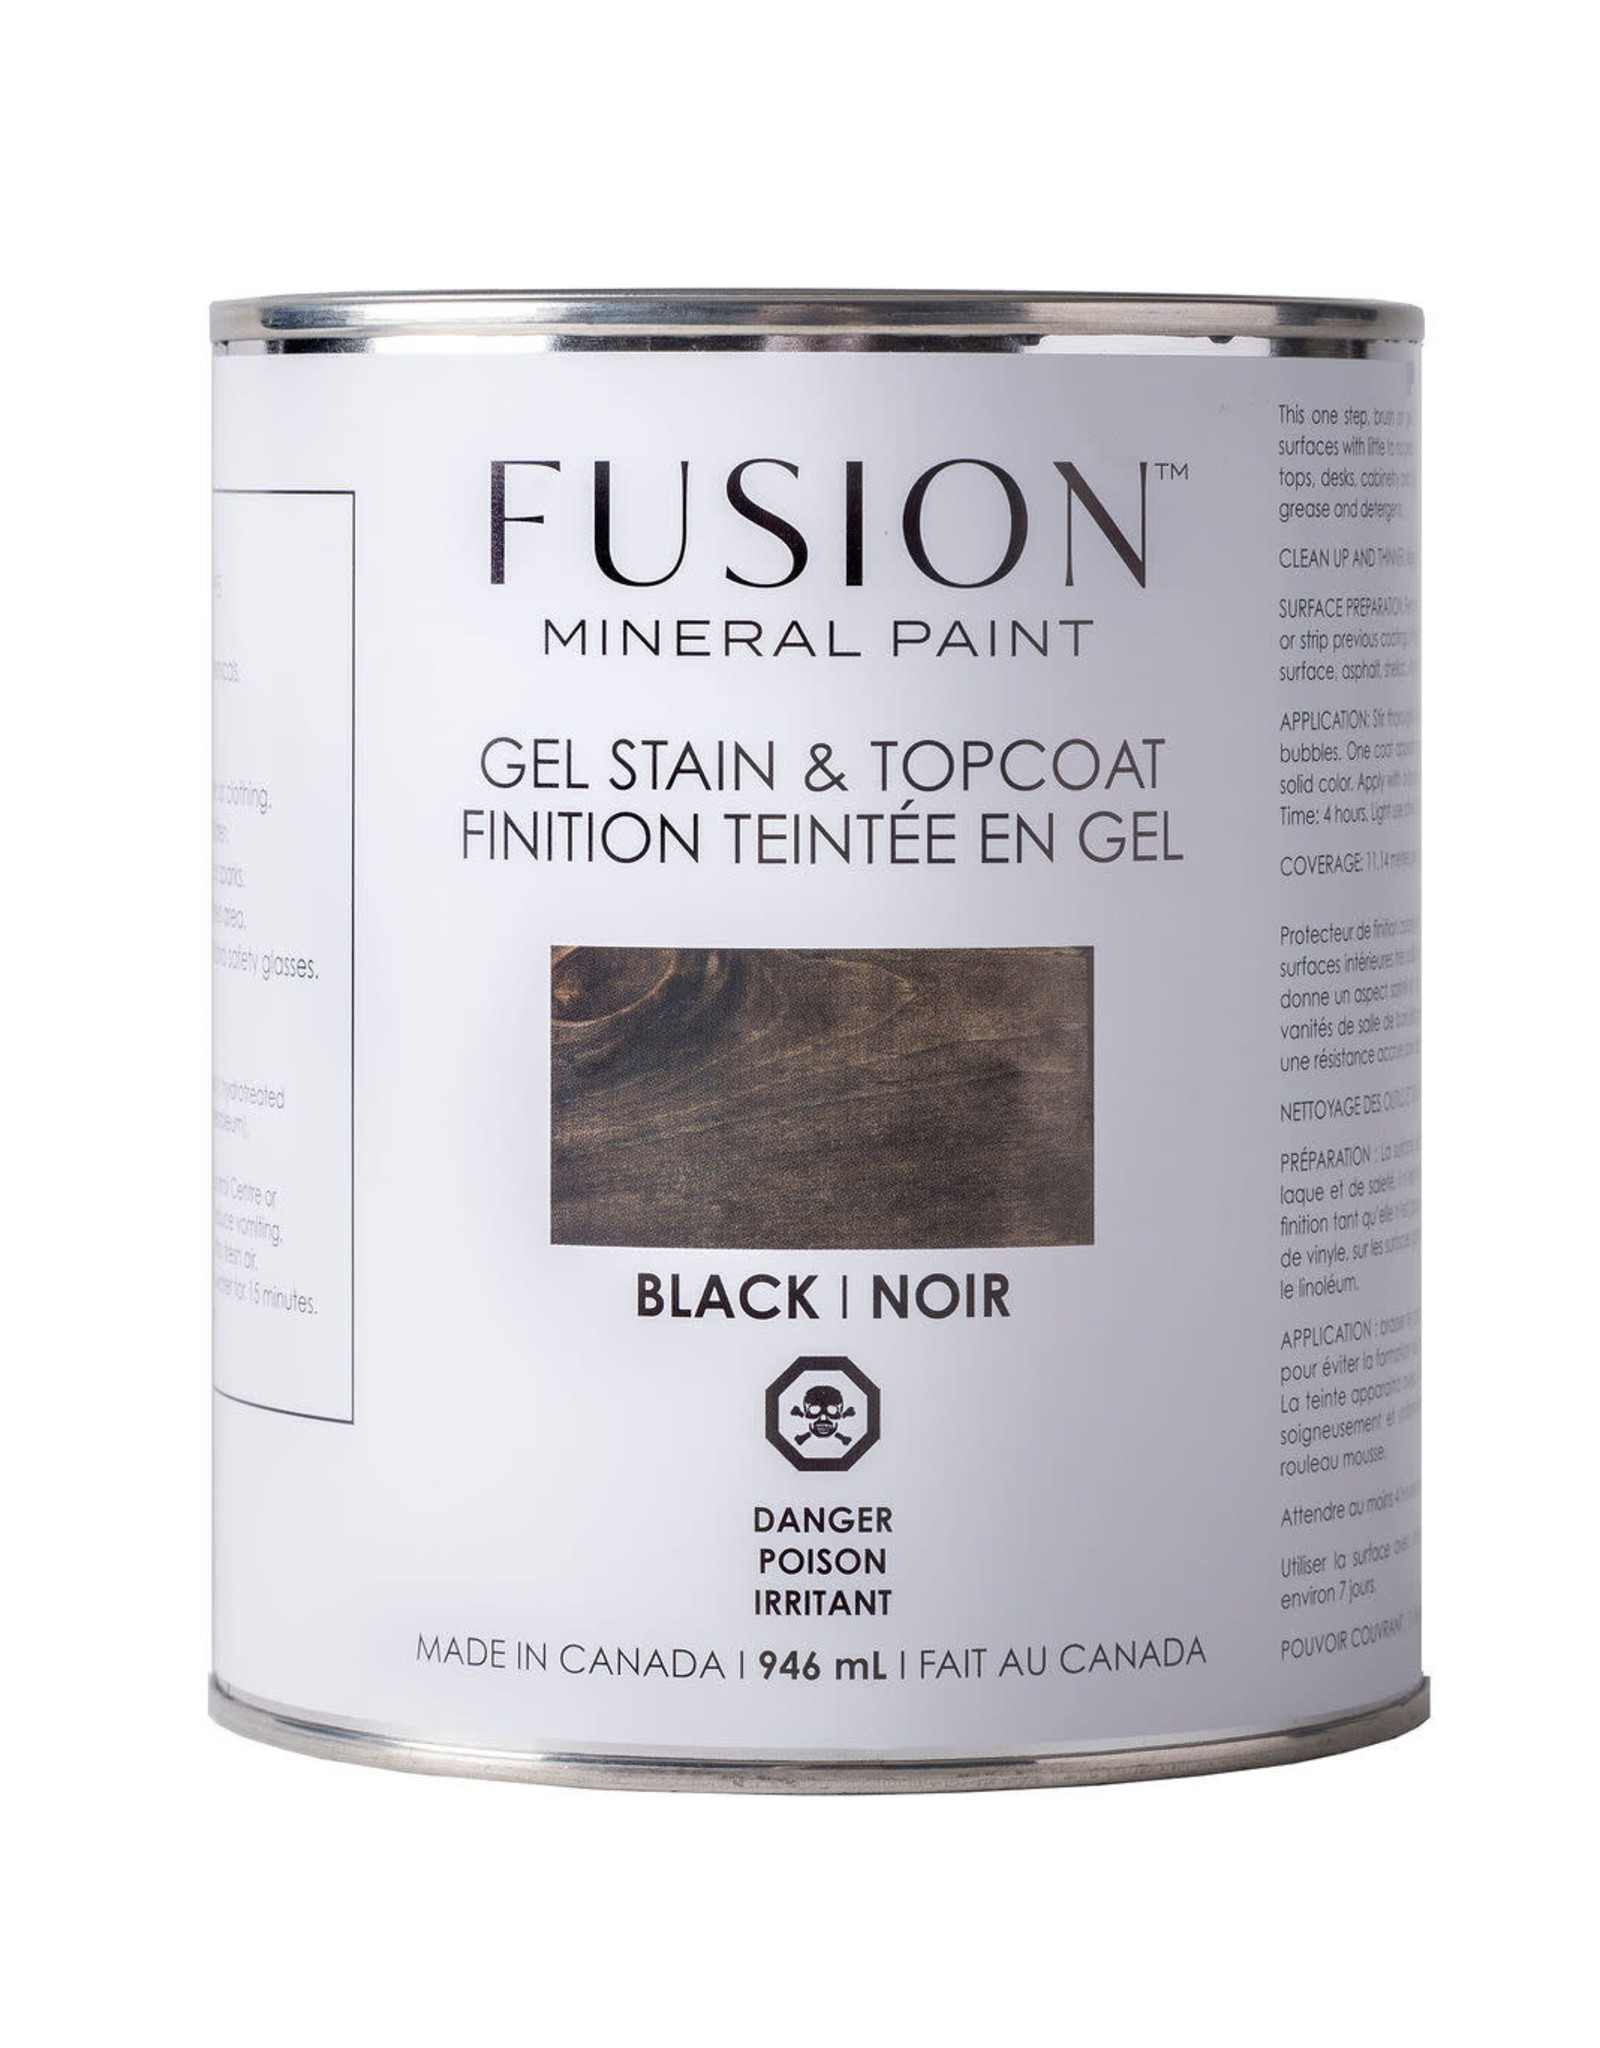 Fusion Mineral Paint Gel Stain & Topcoat - Black